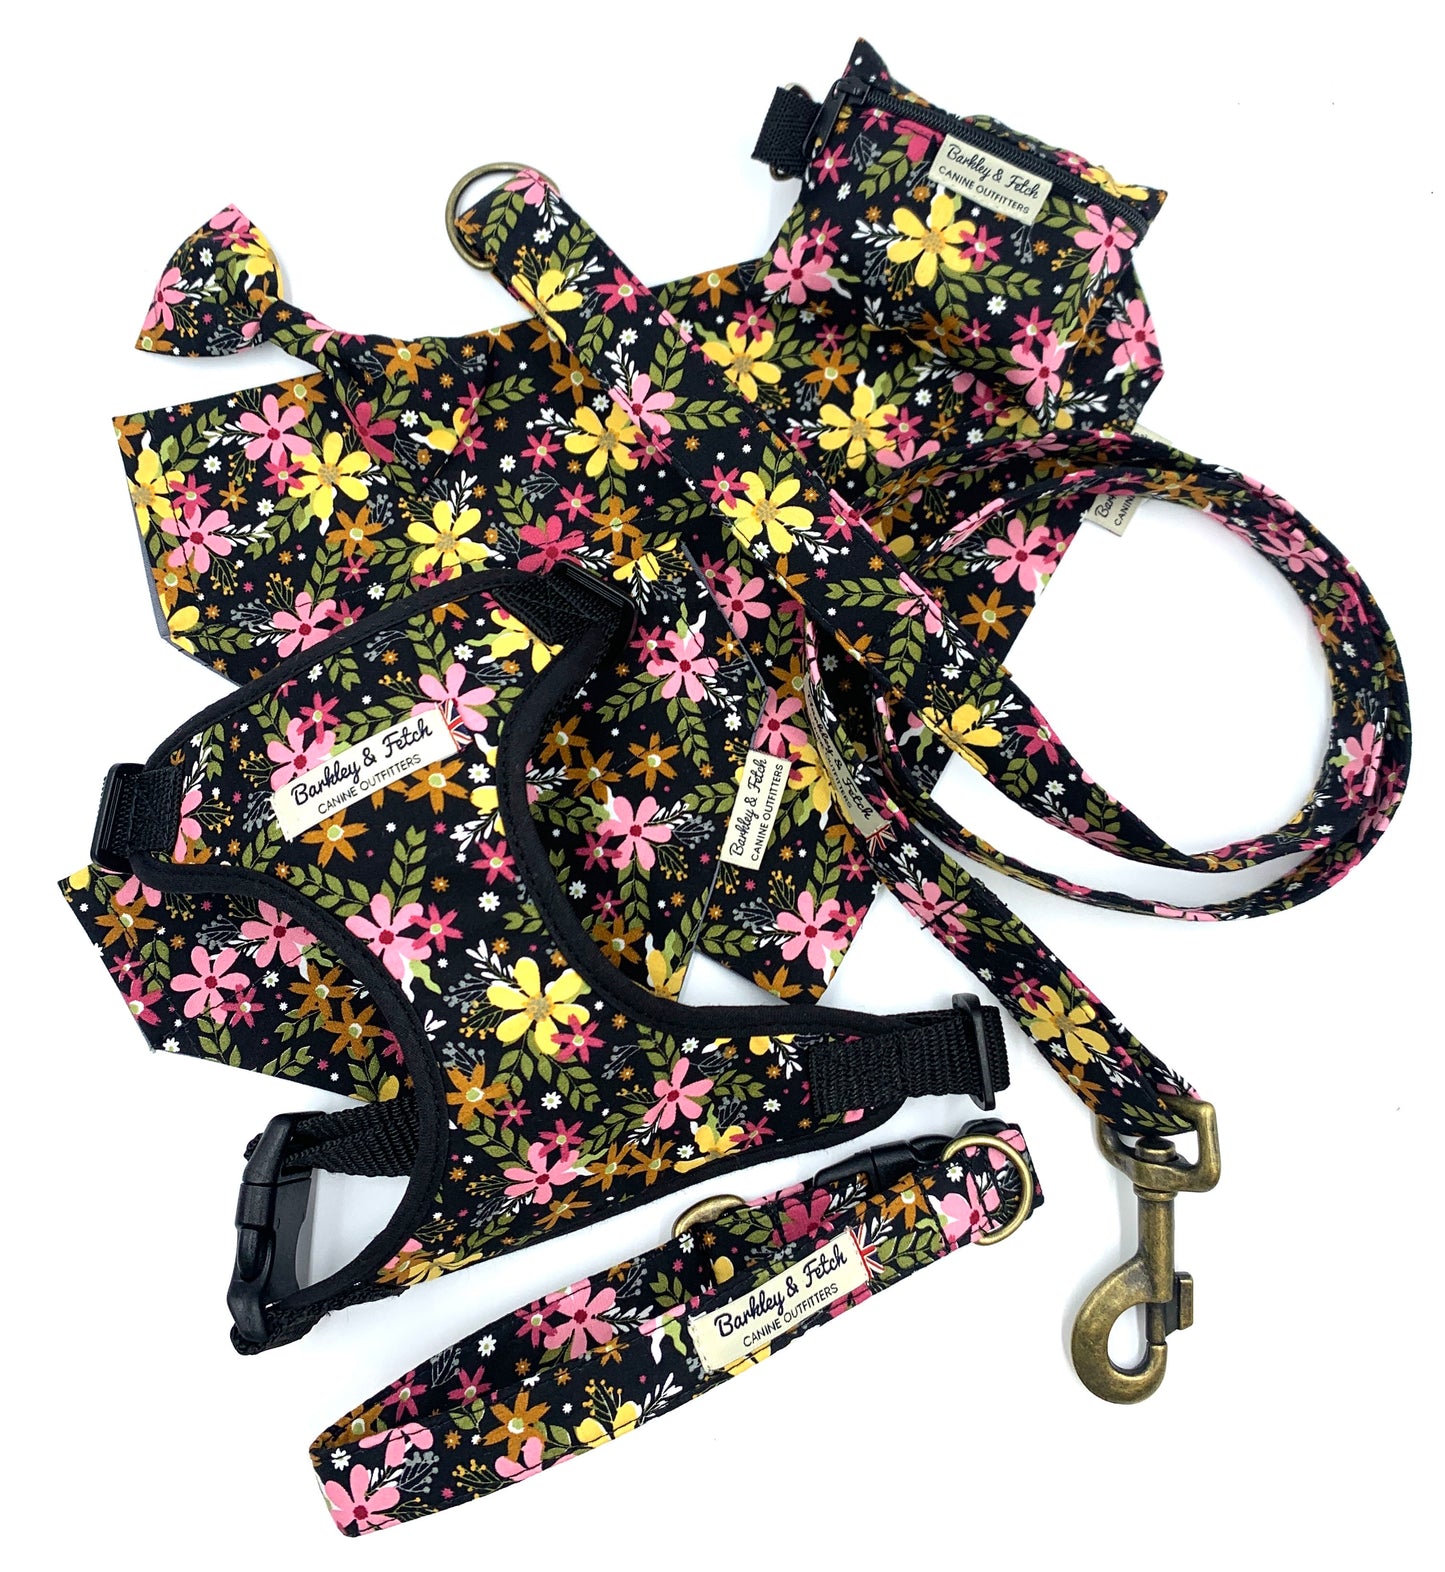 New Black Ditsy Floral Print Harness